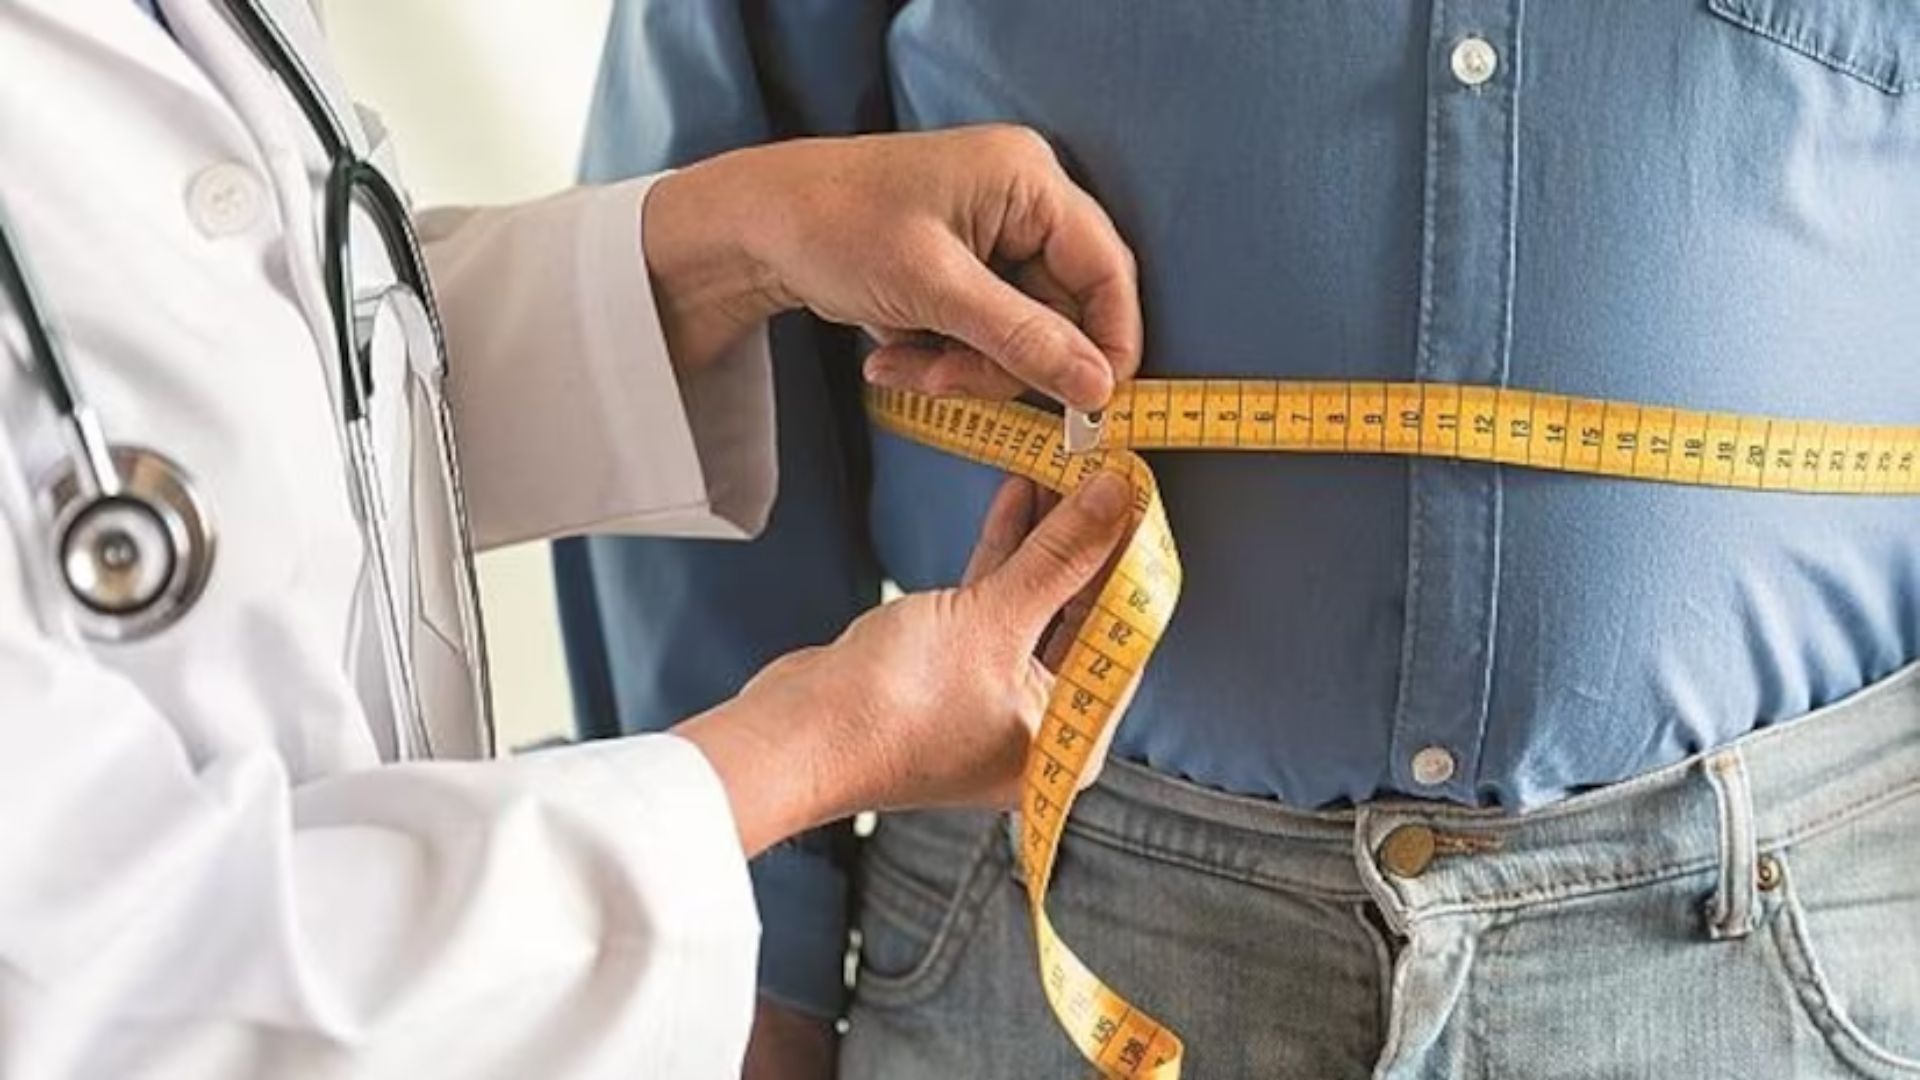 Males born to obese moms more likely to develop health issues as adults according to research